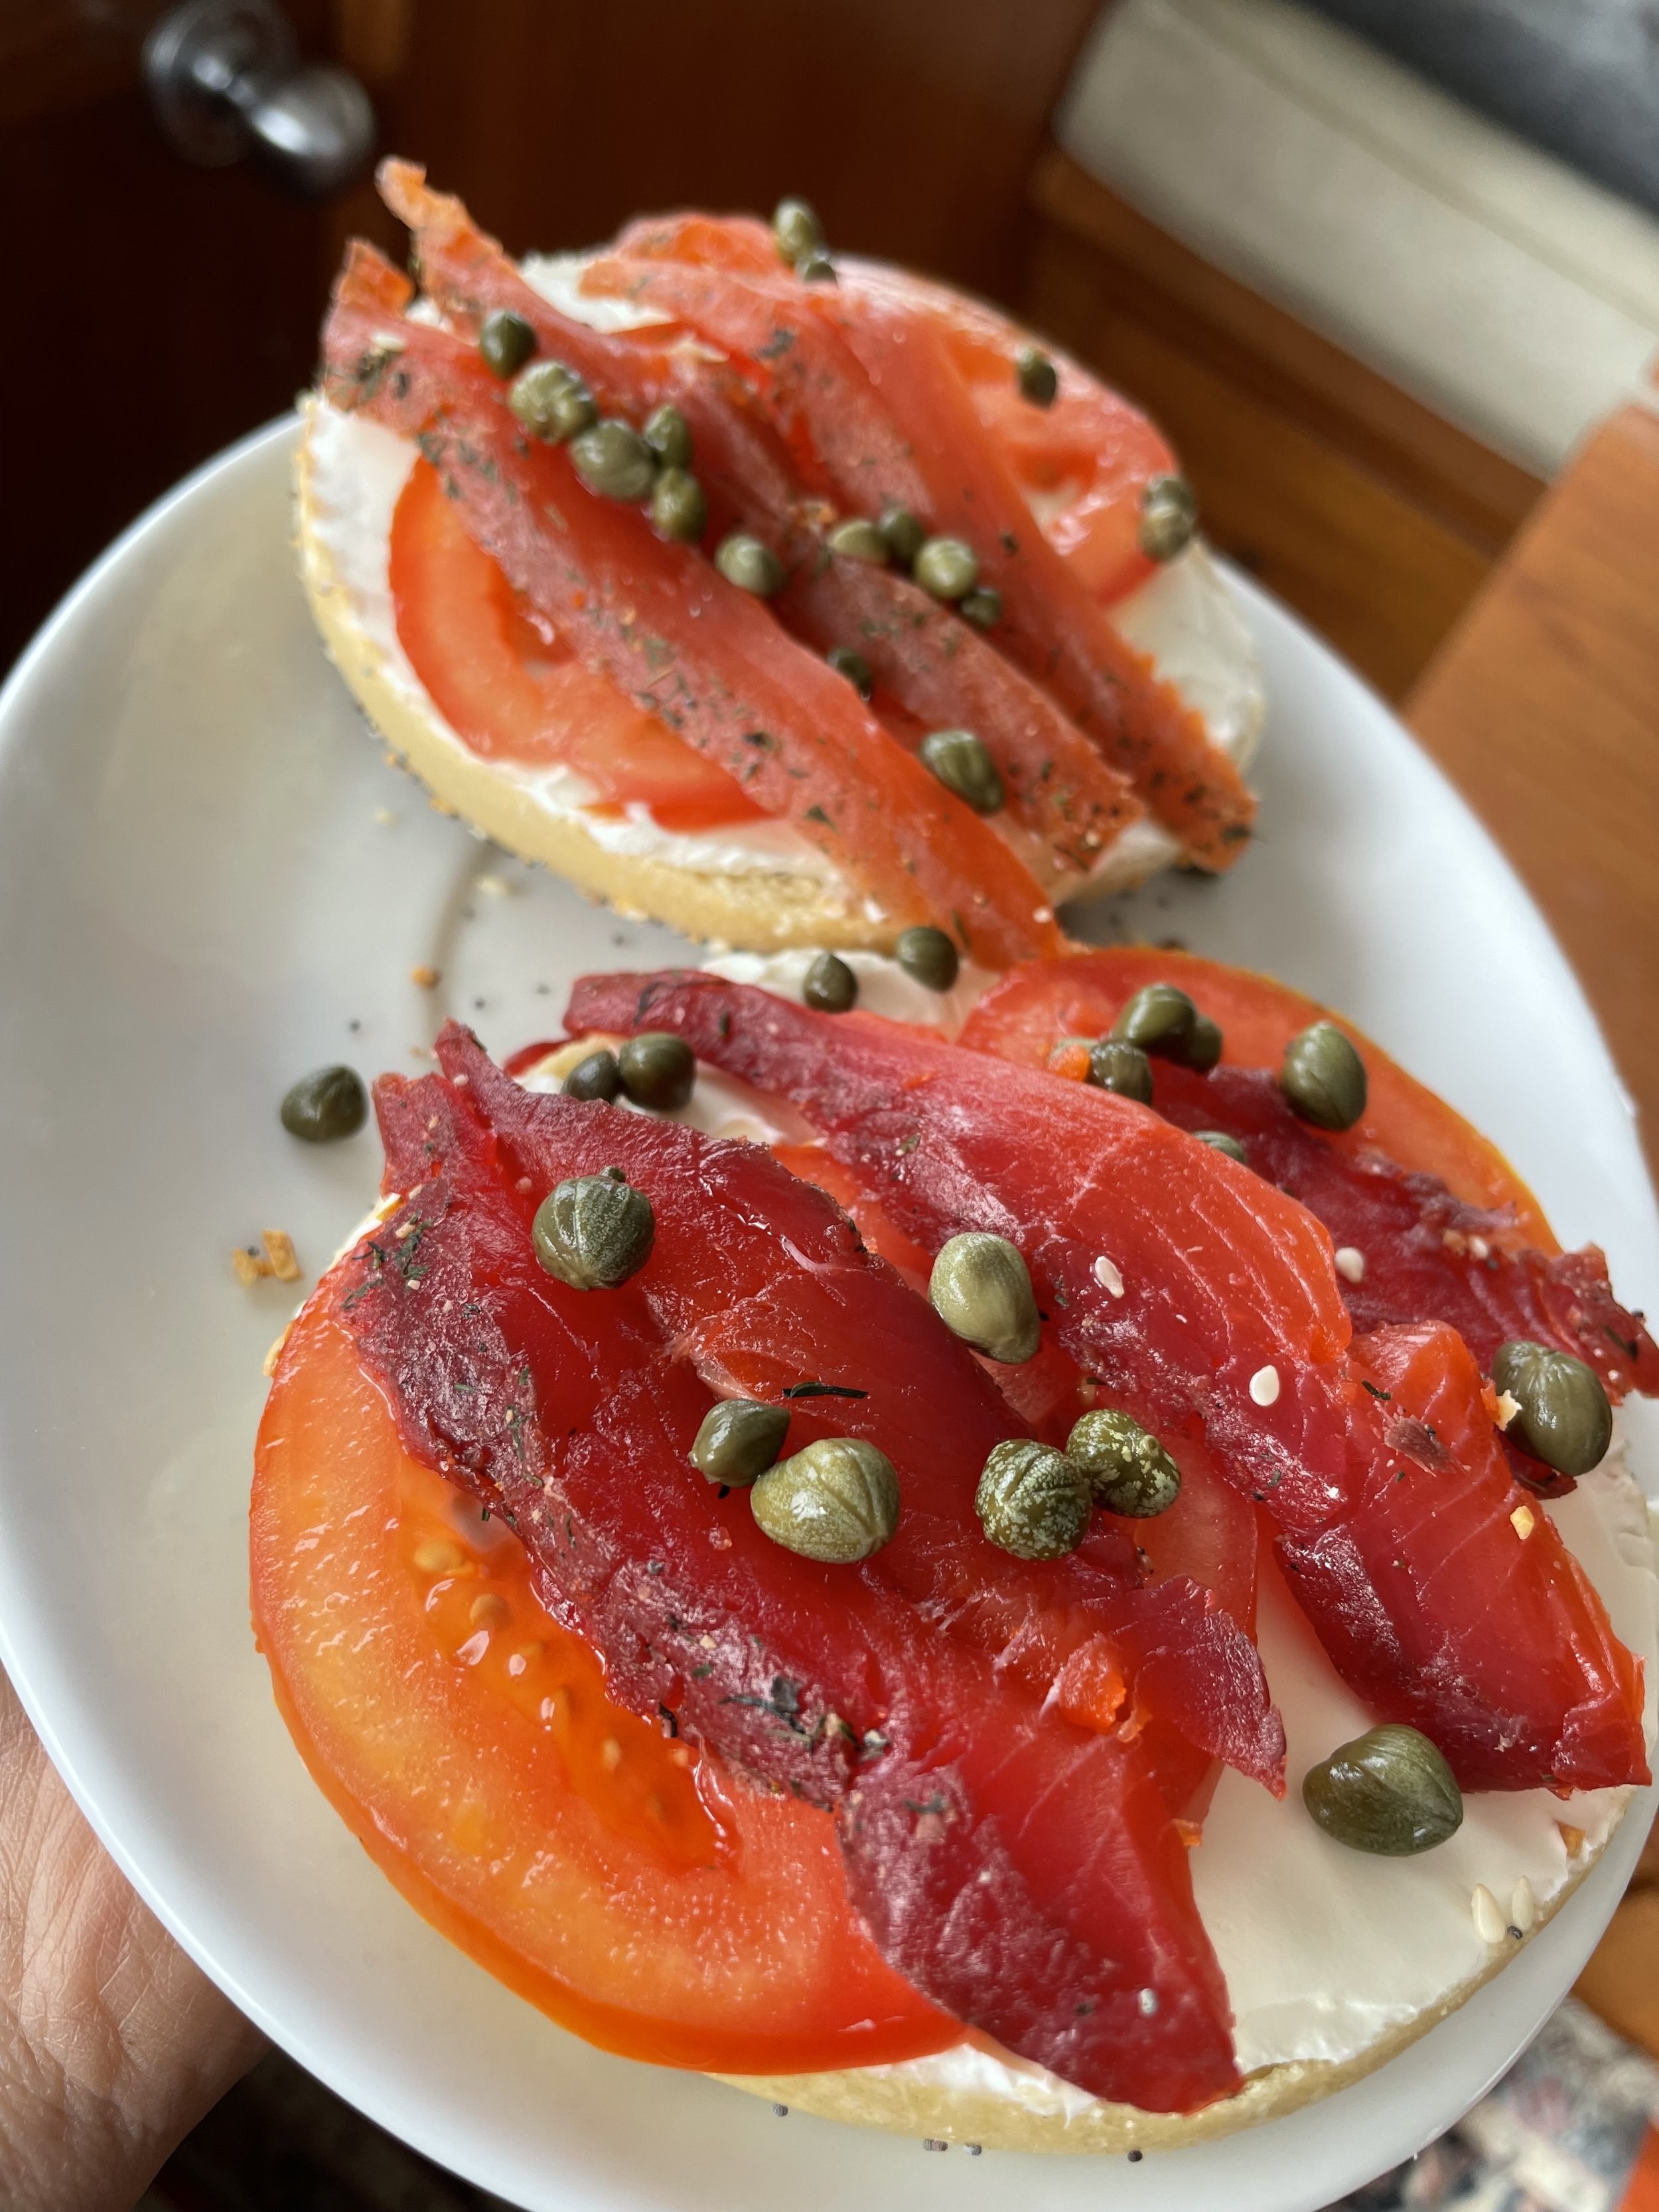 Alaskan lox on bagels topped with capers.